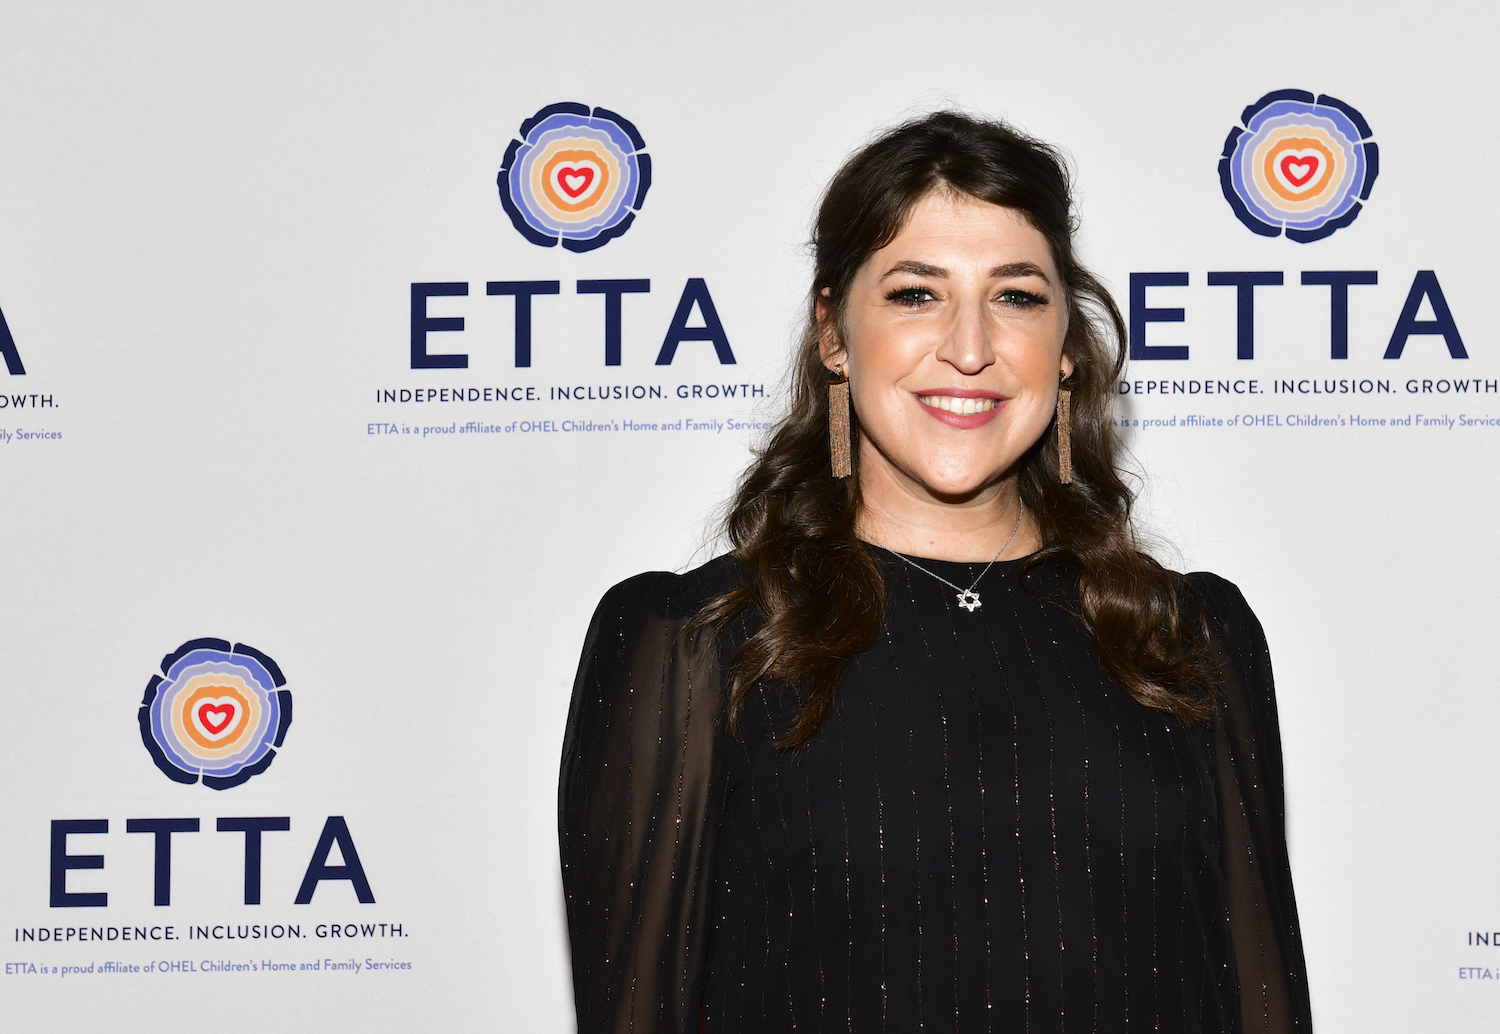 Mayim Bialik smiling in front of a white background